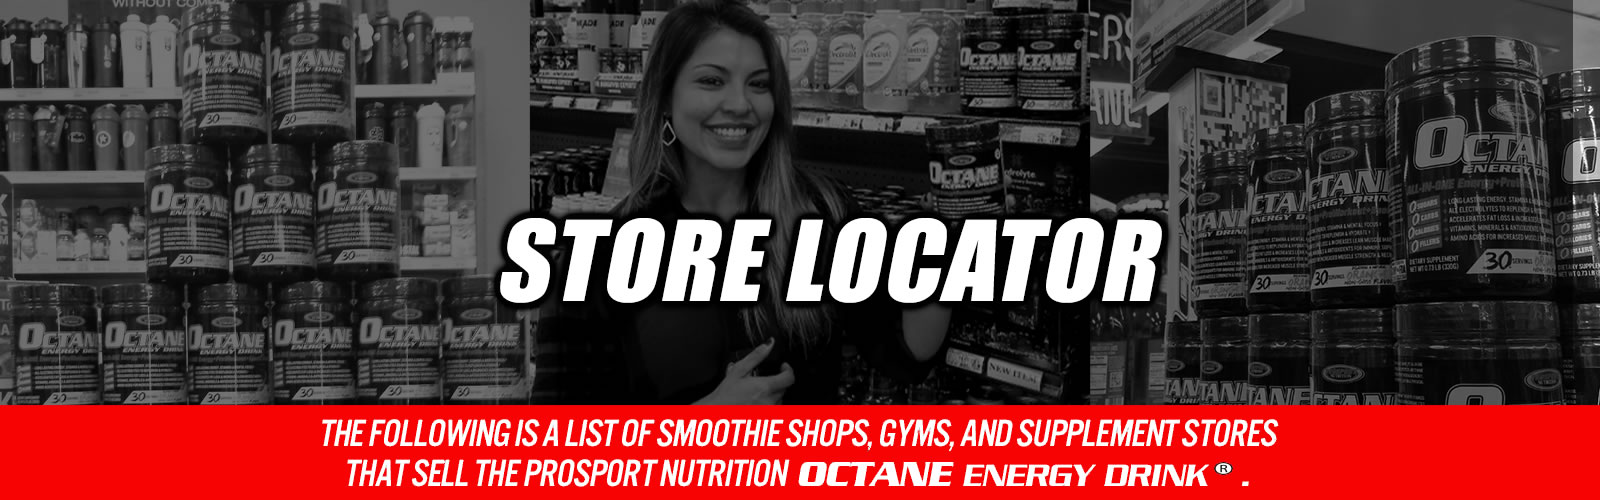 ProSport Nutrition Product Retailers